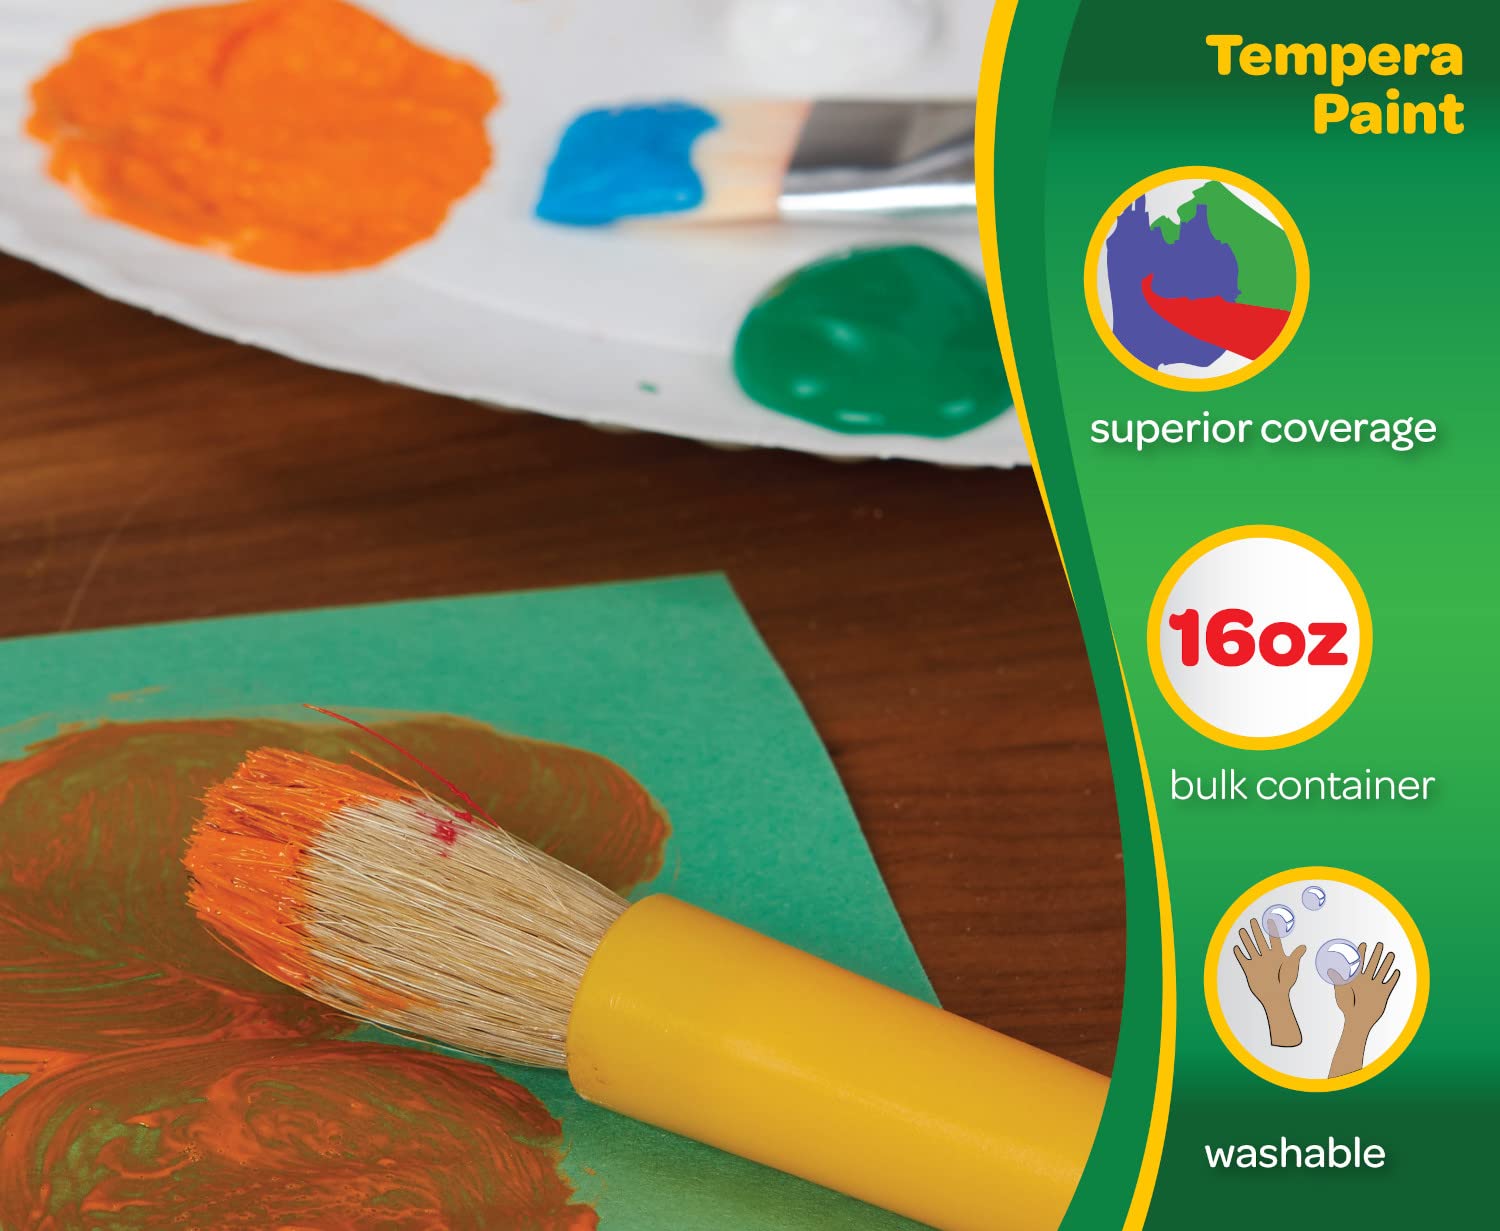 Crayola Premier Tempera Paint For Kids - Brown (16oz), Kids Classroom Supplies, Great For Arts & Crafts, Non Toxic, Easy Squeeze Bottle